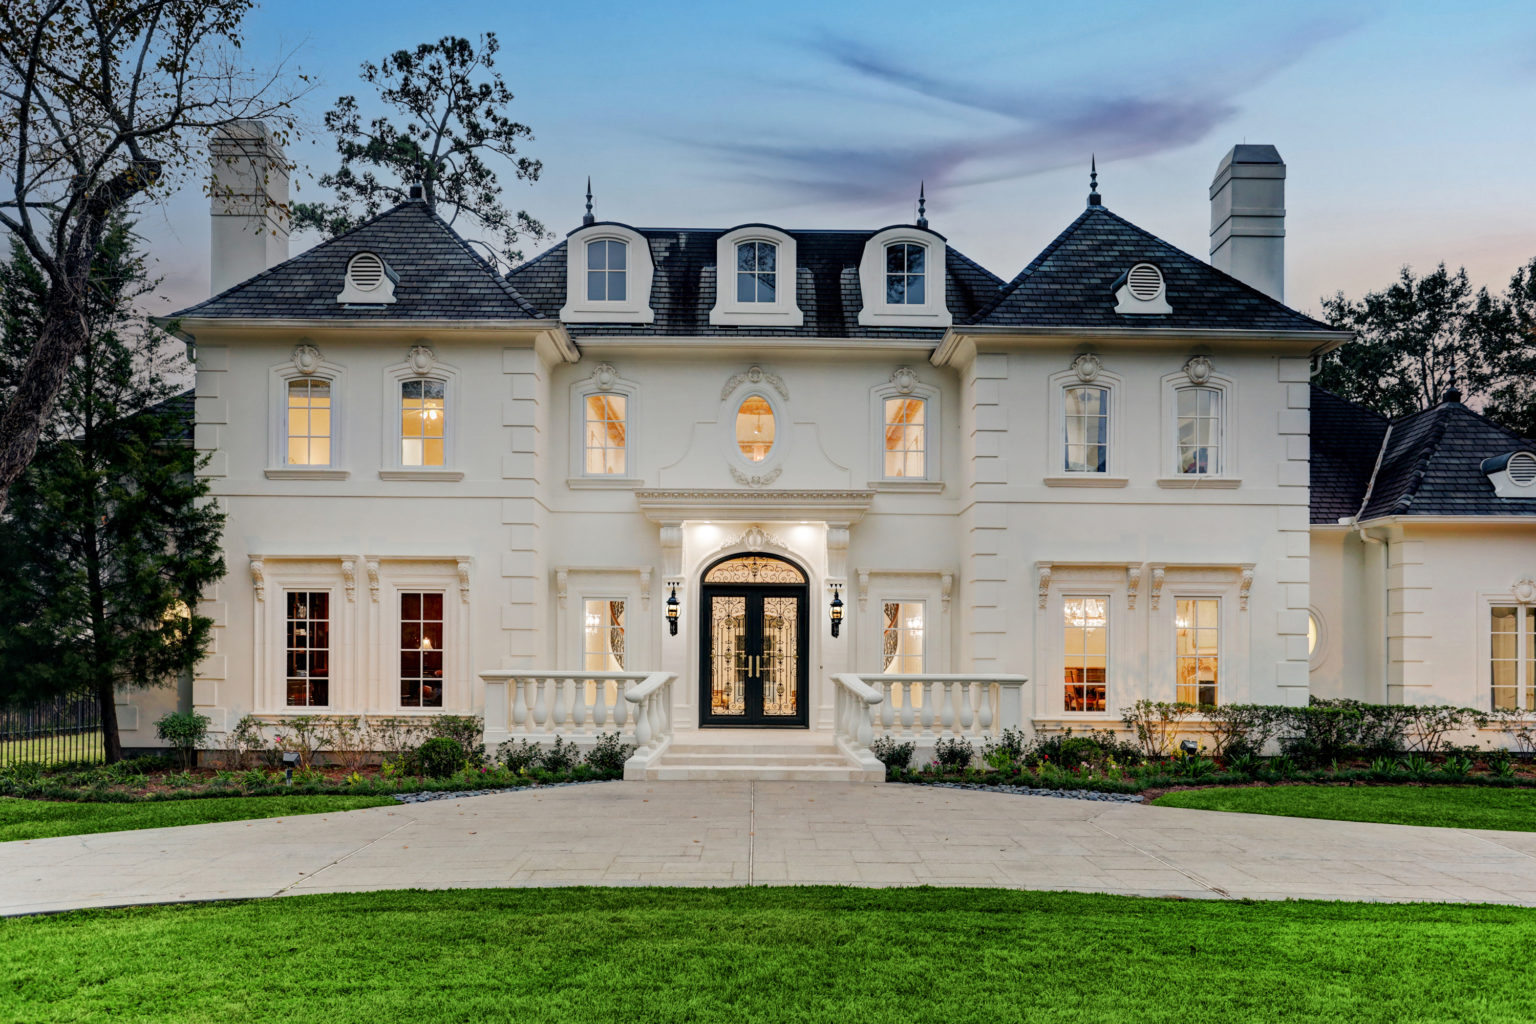 French Chateau Mansion in Memorial Brings Old World Charm and a $4.1 Million Asking Price